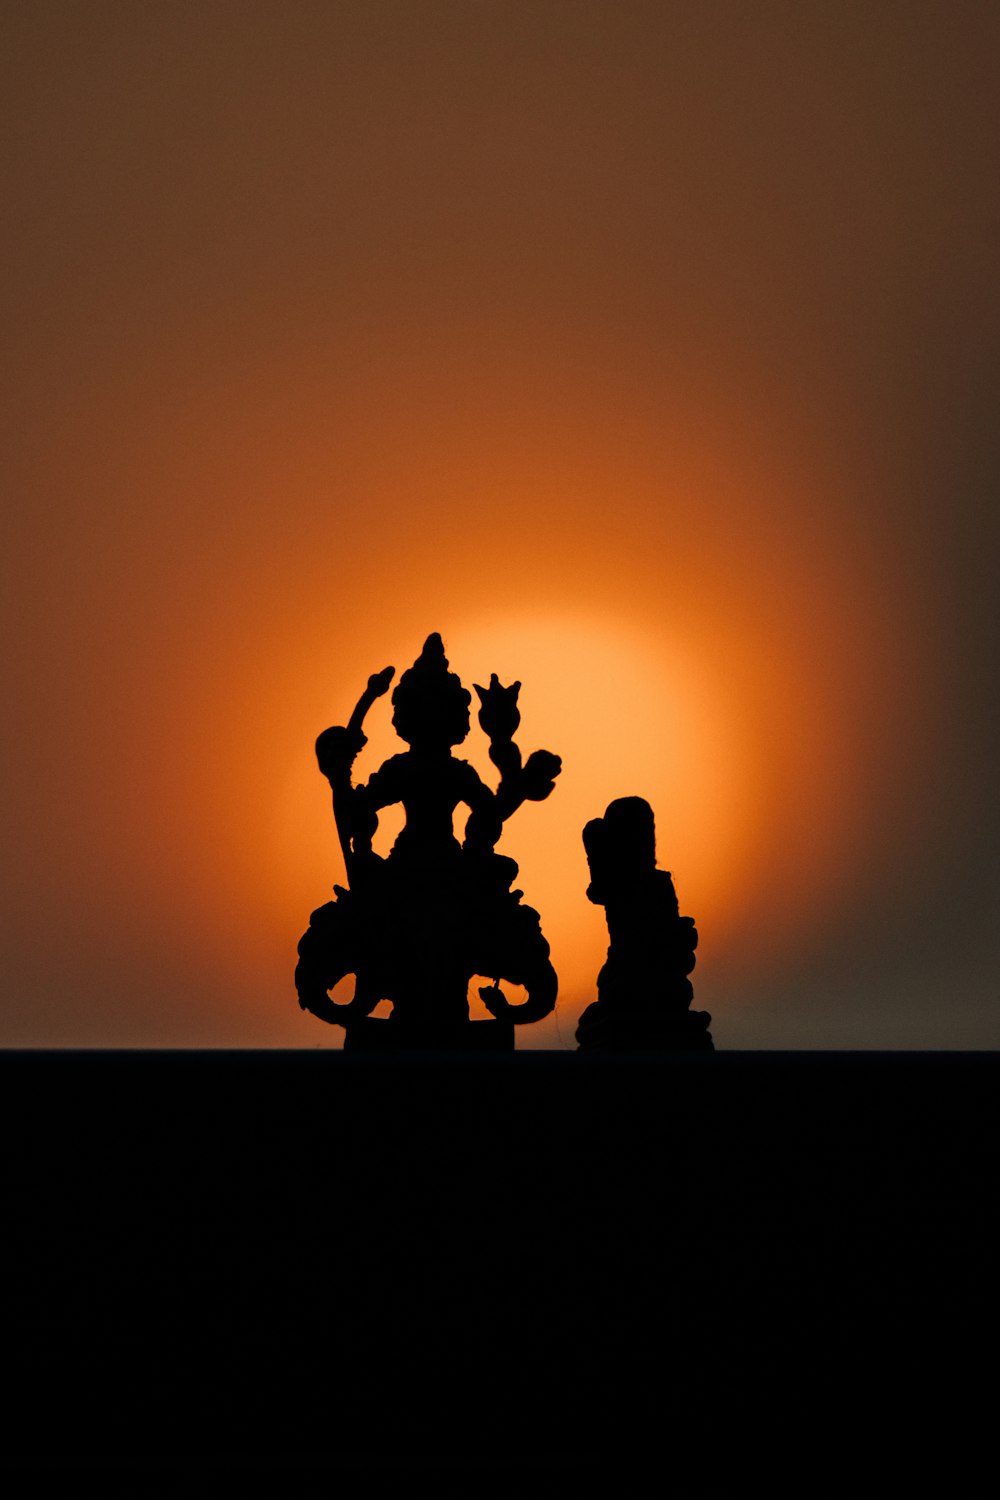 the sun is setting behind a silhouette of a statue